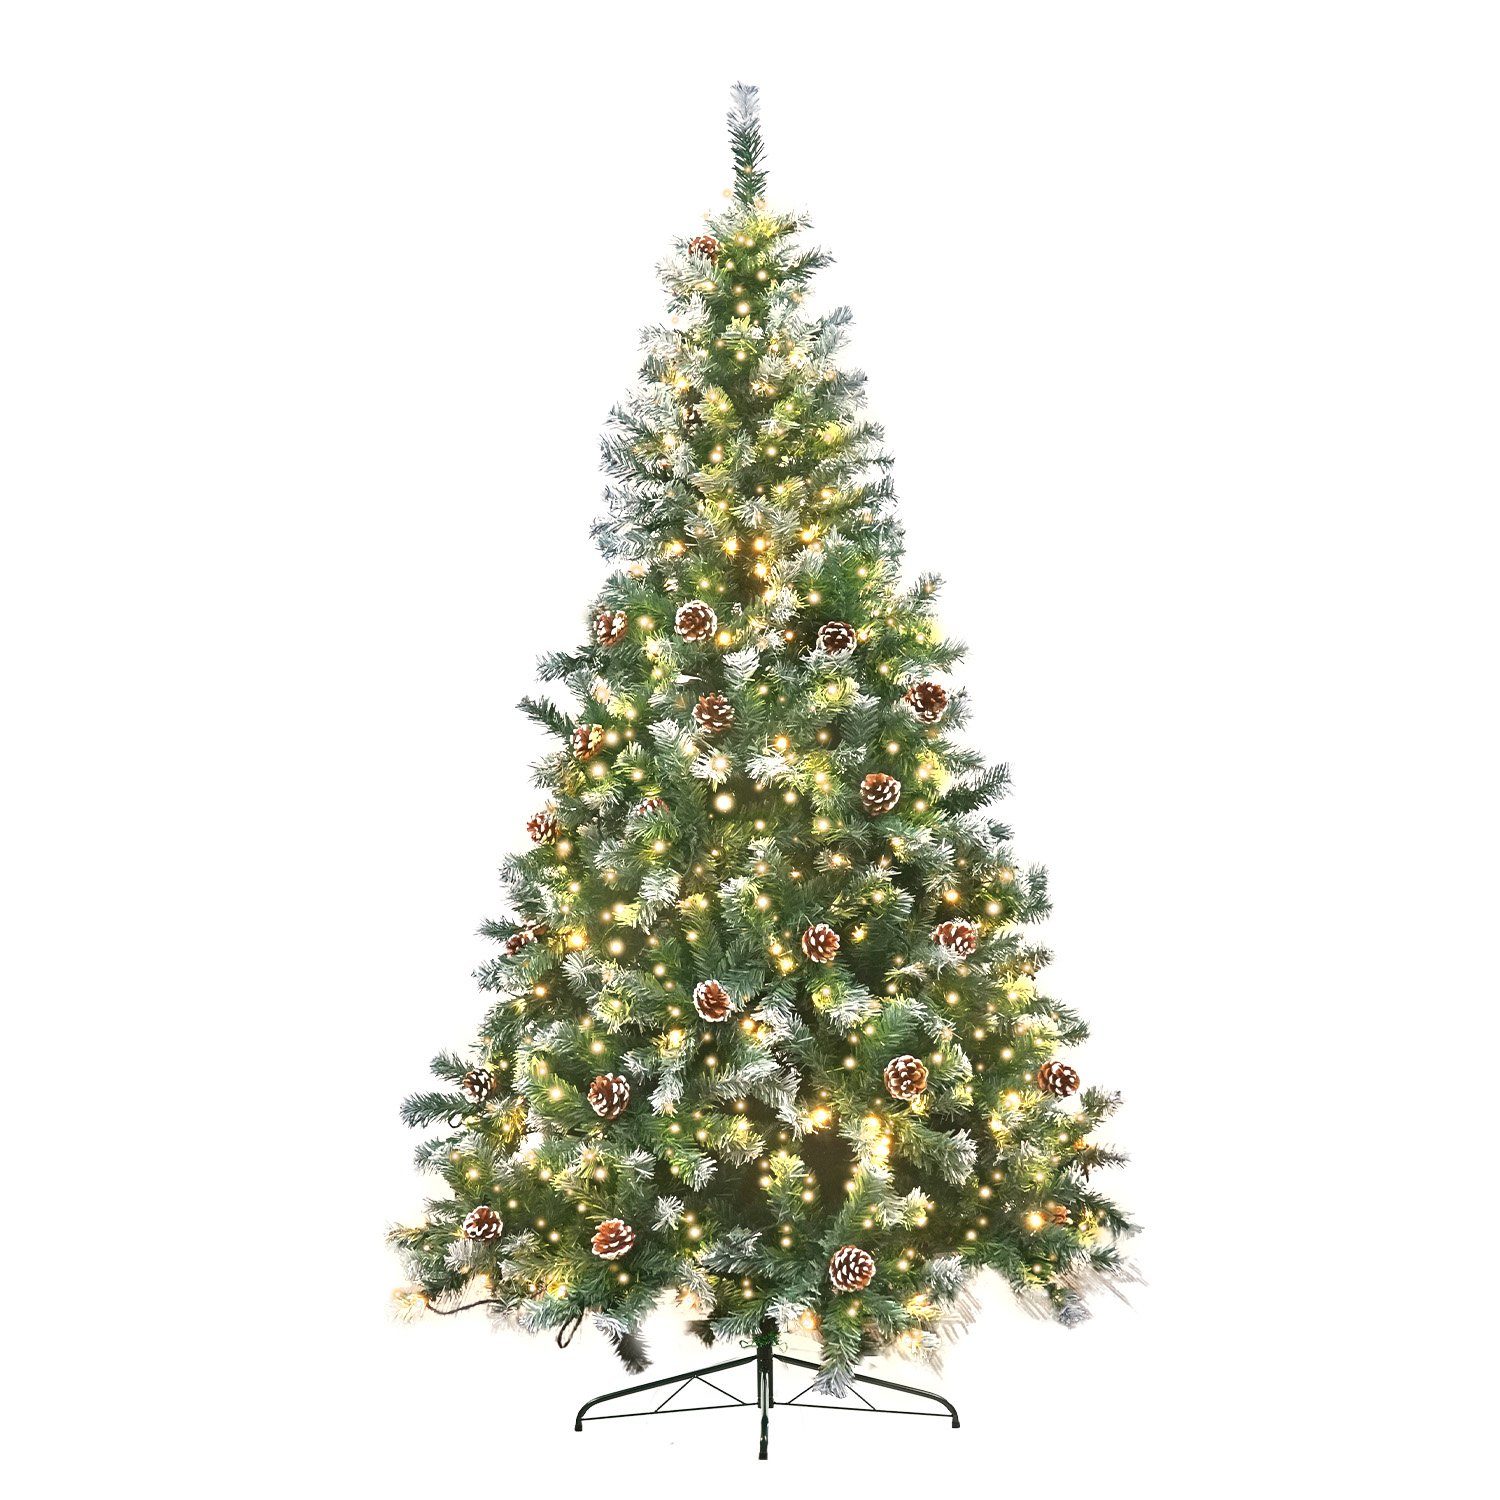 Christabelle 2.4m Pre Lit LED Christmas Tree with Pine Cones 2